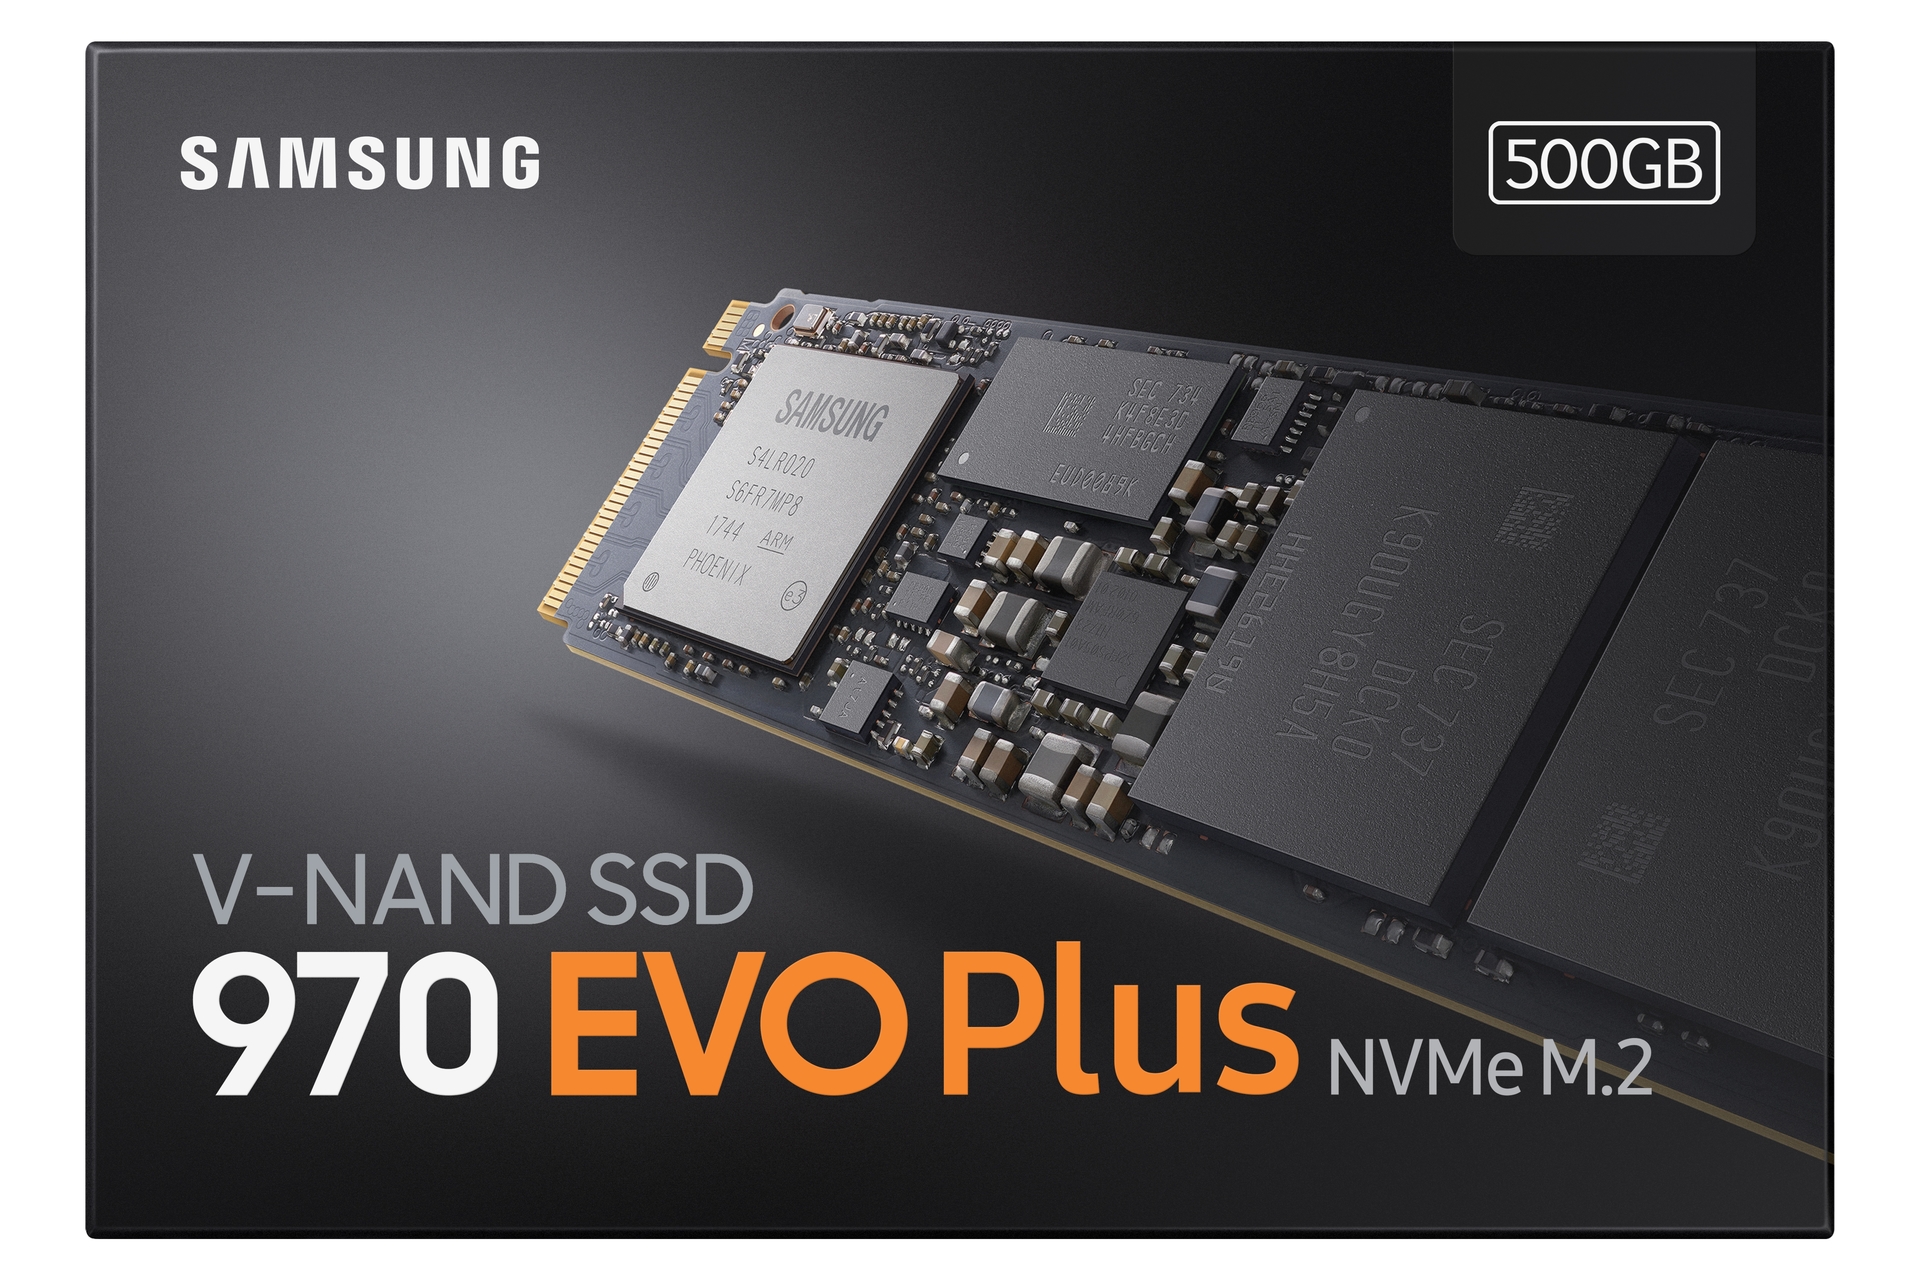 Samsung 970 EVO Plus SSD 500GB - M.2 NVMe Interface Internal Solid State Drive with V-NAND Technology (MZ-V7S500B/AM)